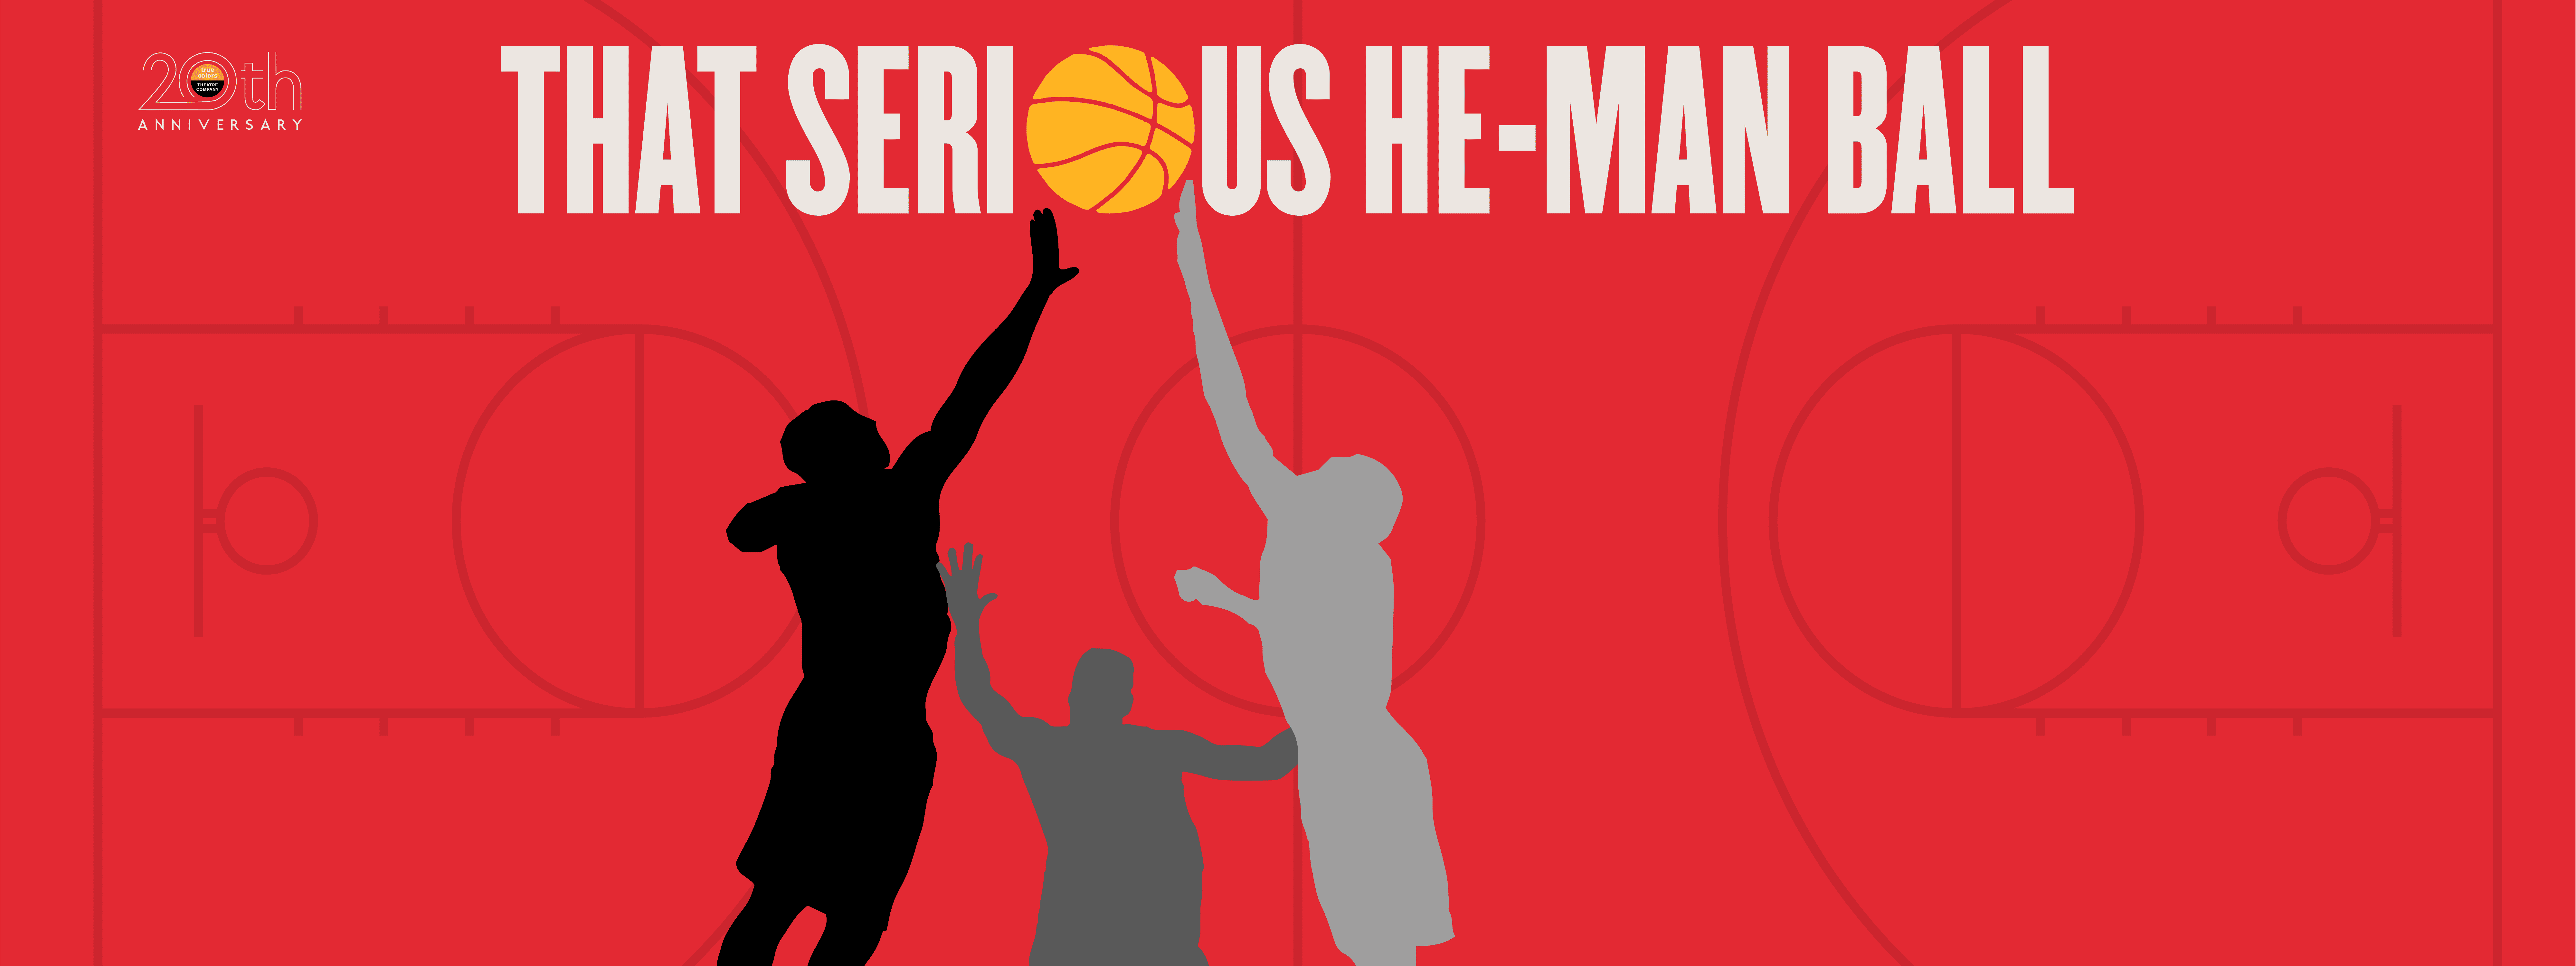 That Serious He-Man Ball - Directed by Eric Little